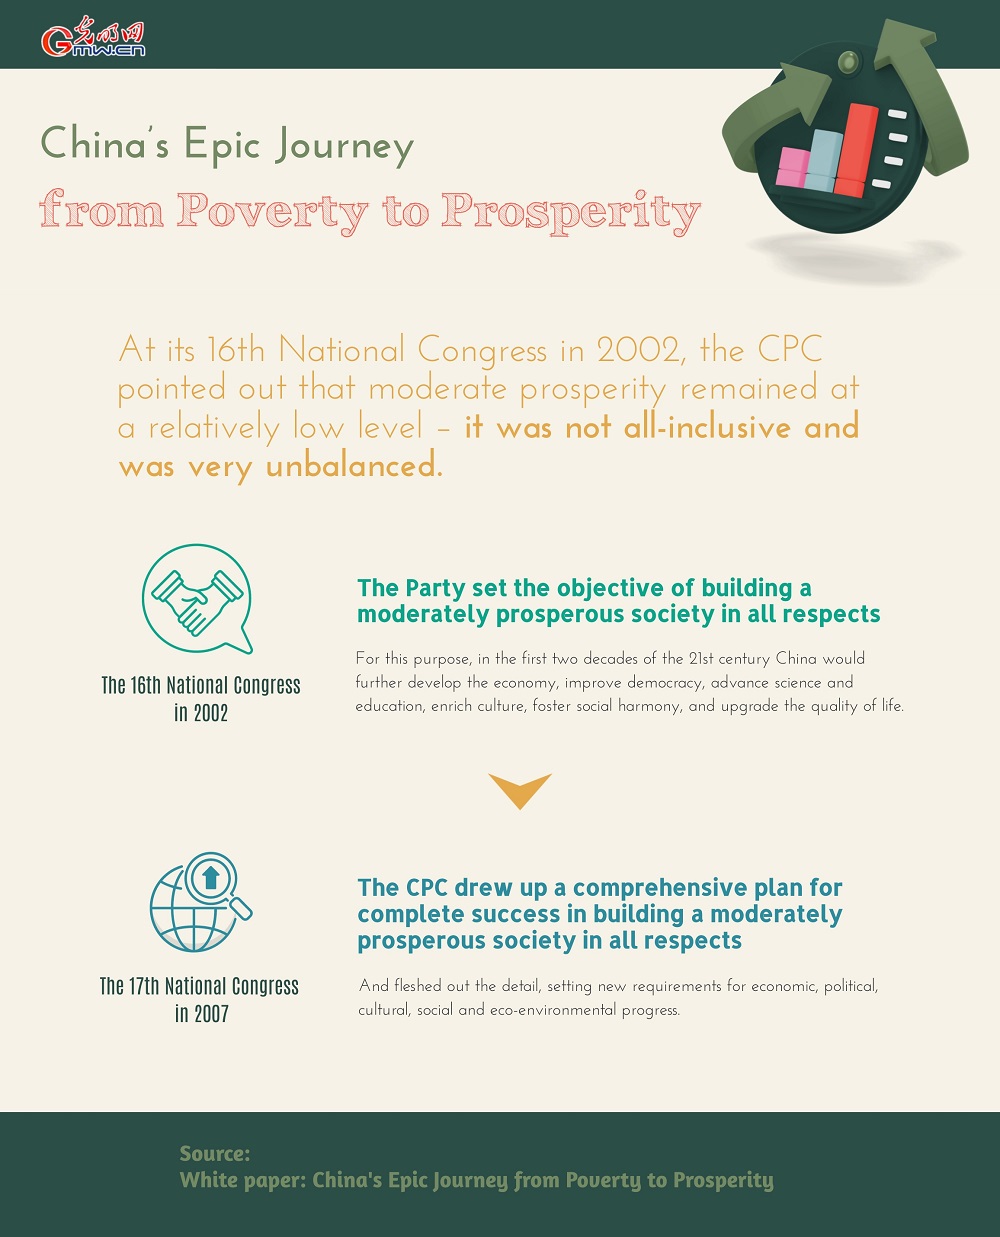 Timeline: China's epic journey from poverty to prosperity